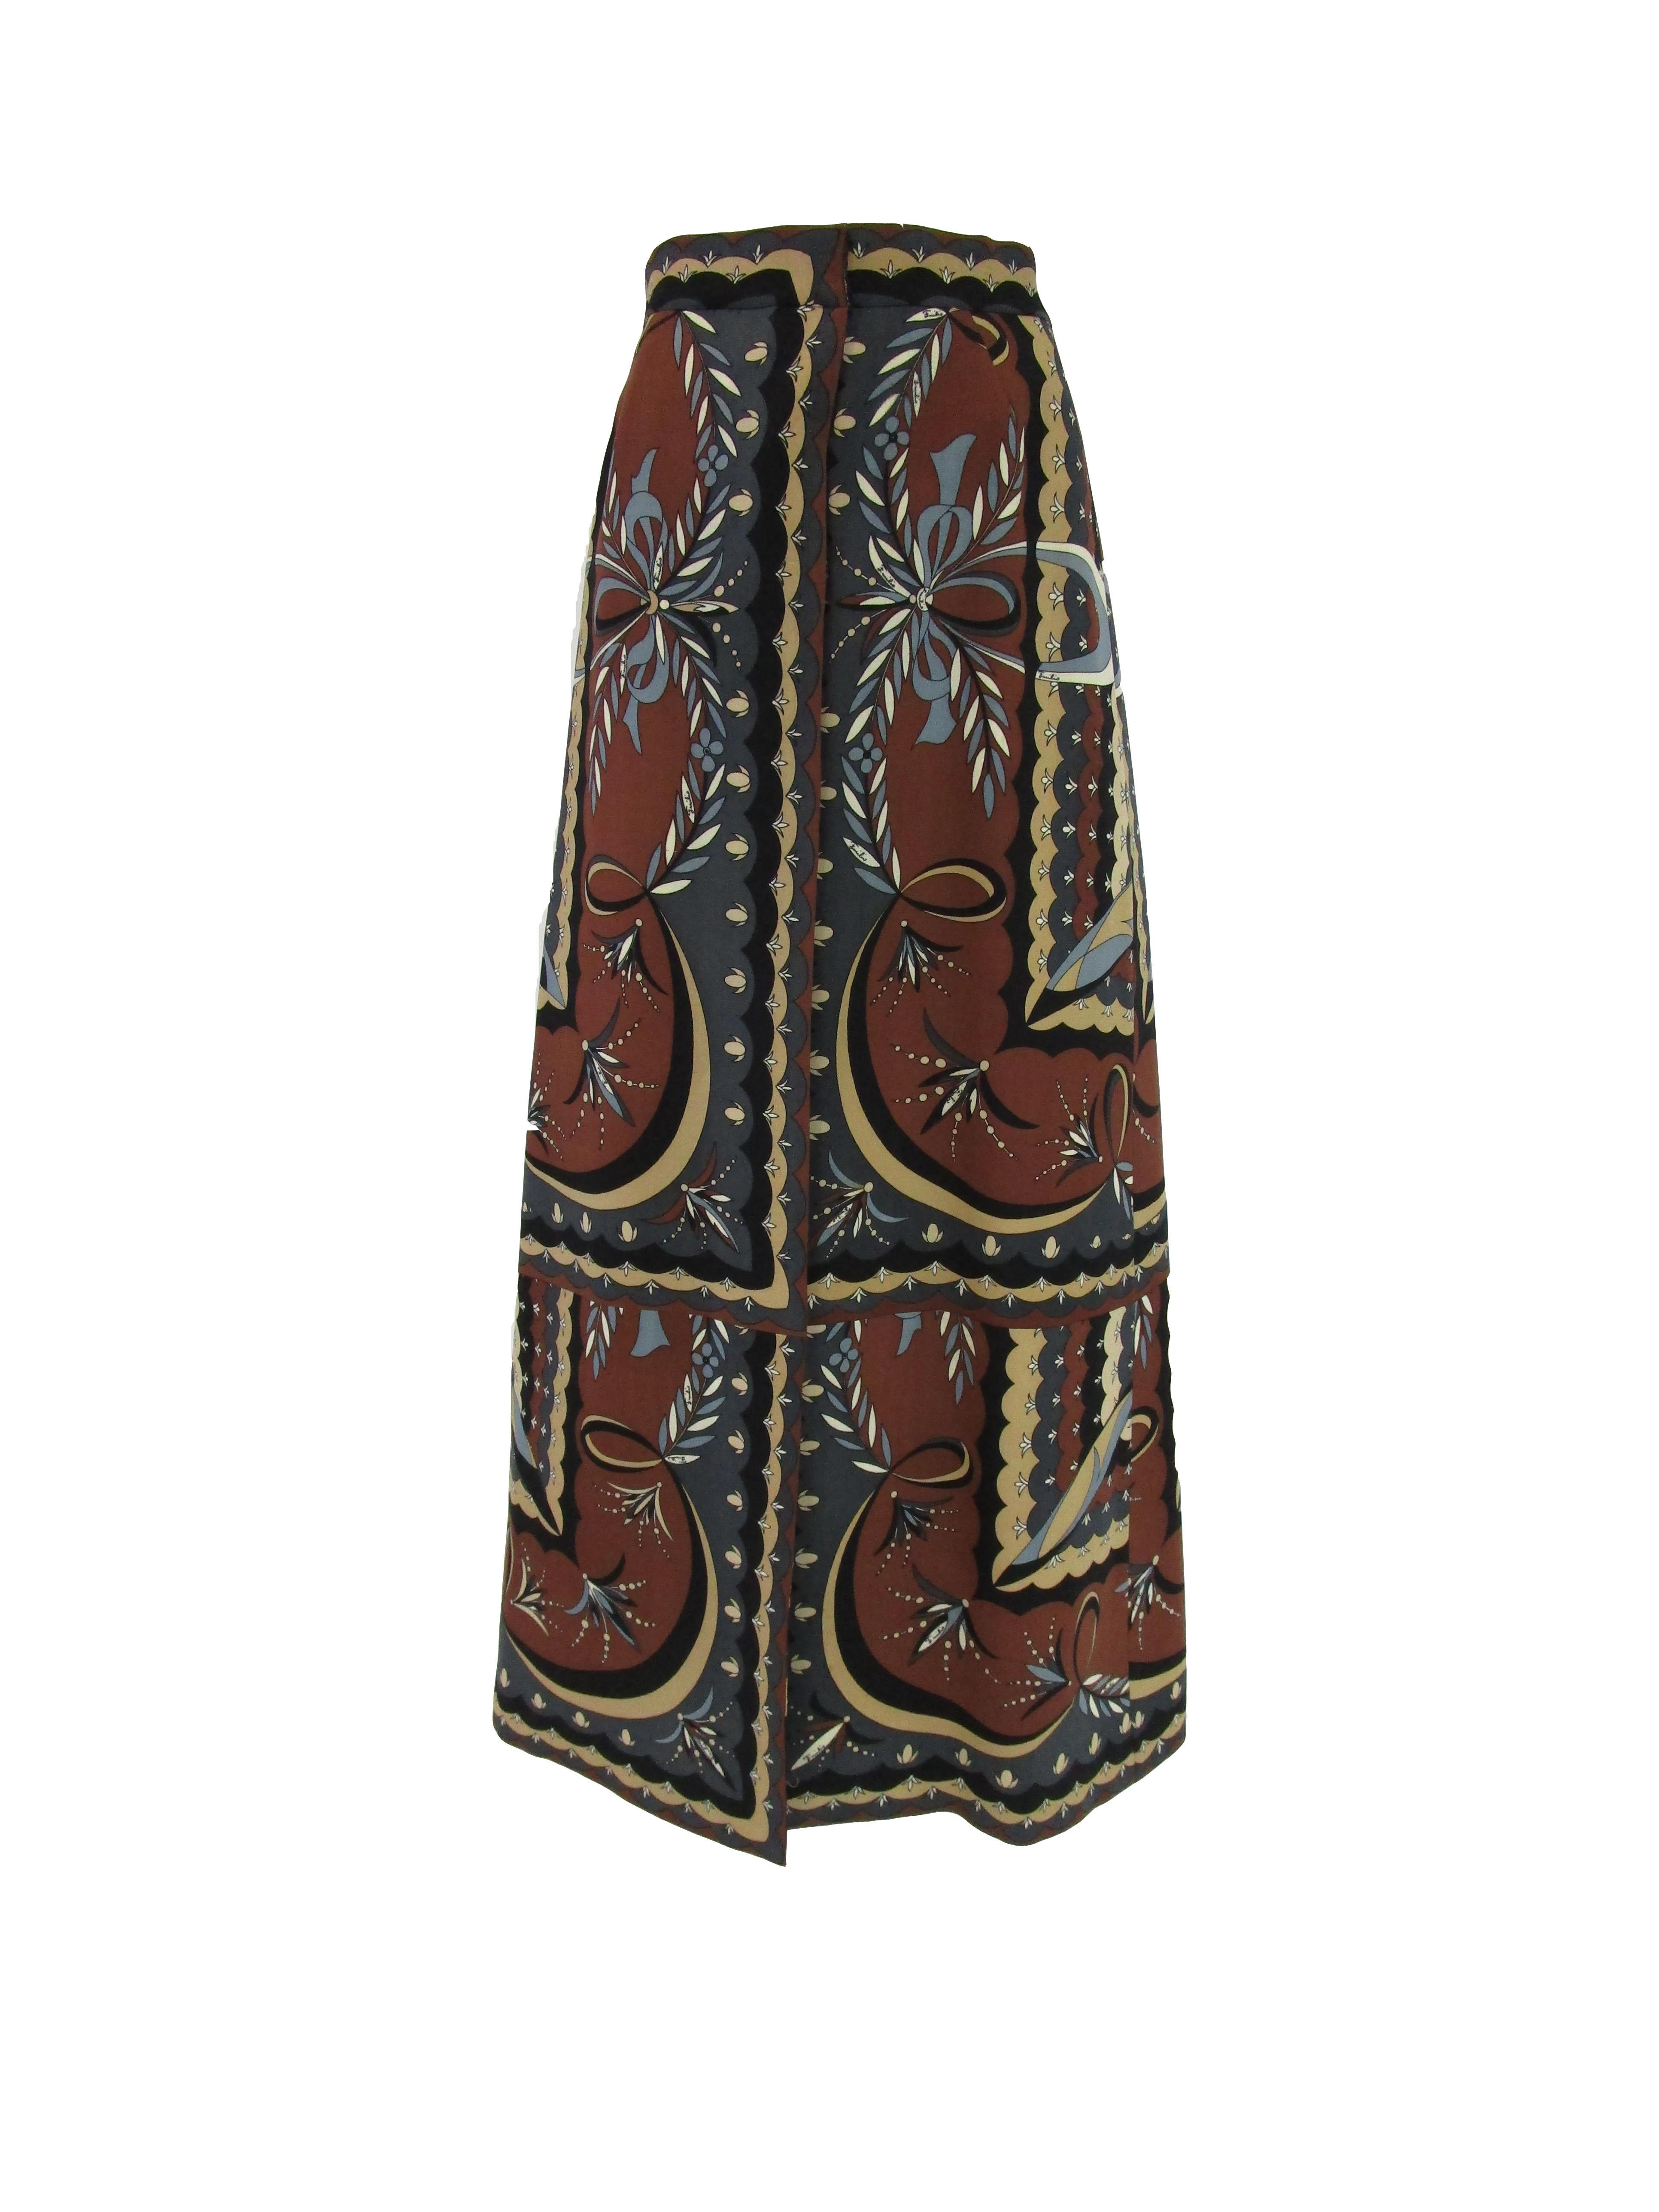 
Instantly captivating wrap skirt by Emilio Pucci!
It features Pucci's classic allover print, this one being a beautiful medley of earthy colors and interesting shapes.
This skirt features many women's favorite thing, pockets! The closure of this